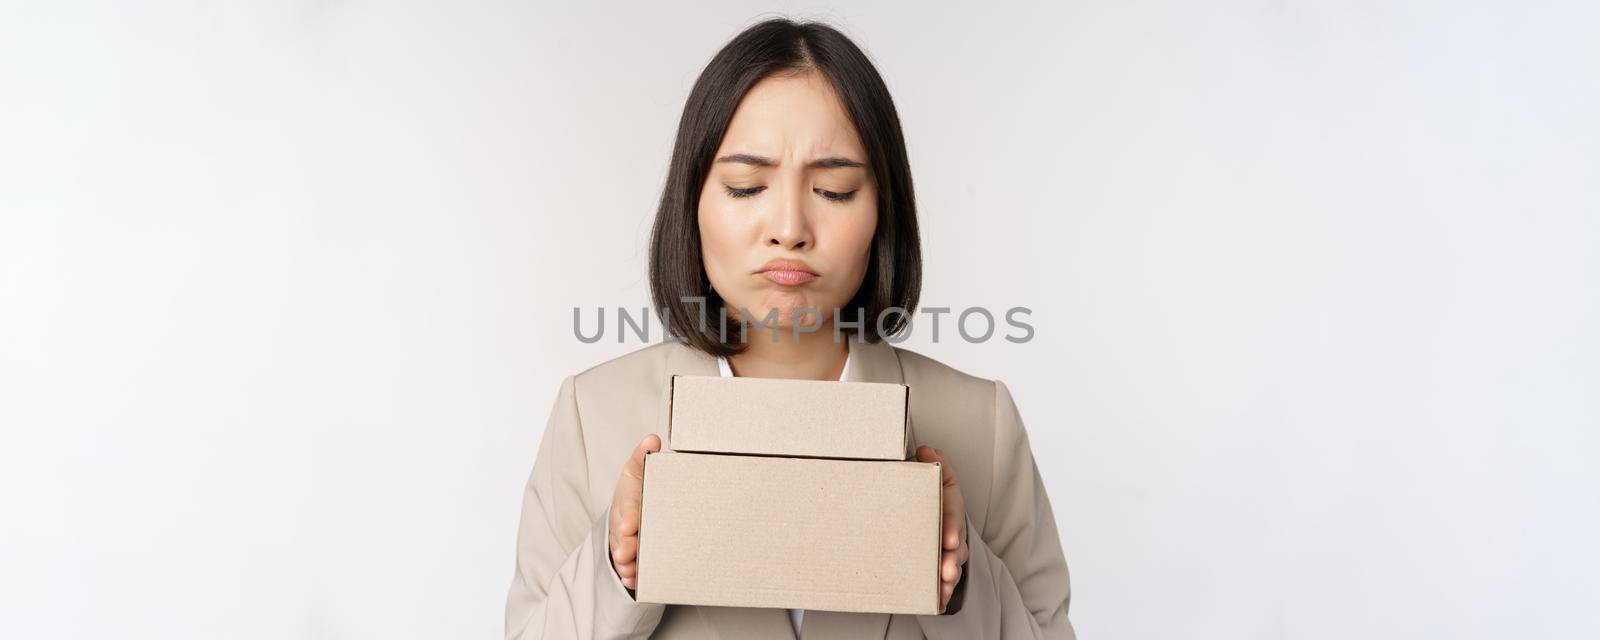 Portrait of asian saleswoman, female entrepreneur holding boxes and looking sad, disappointed, standing over white background.